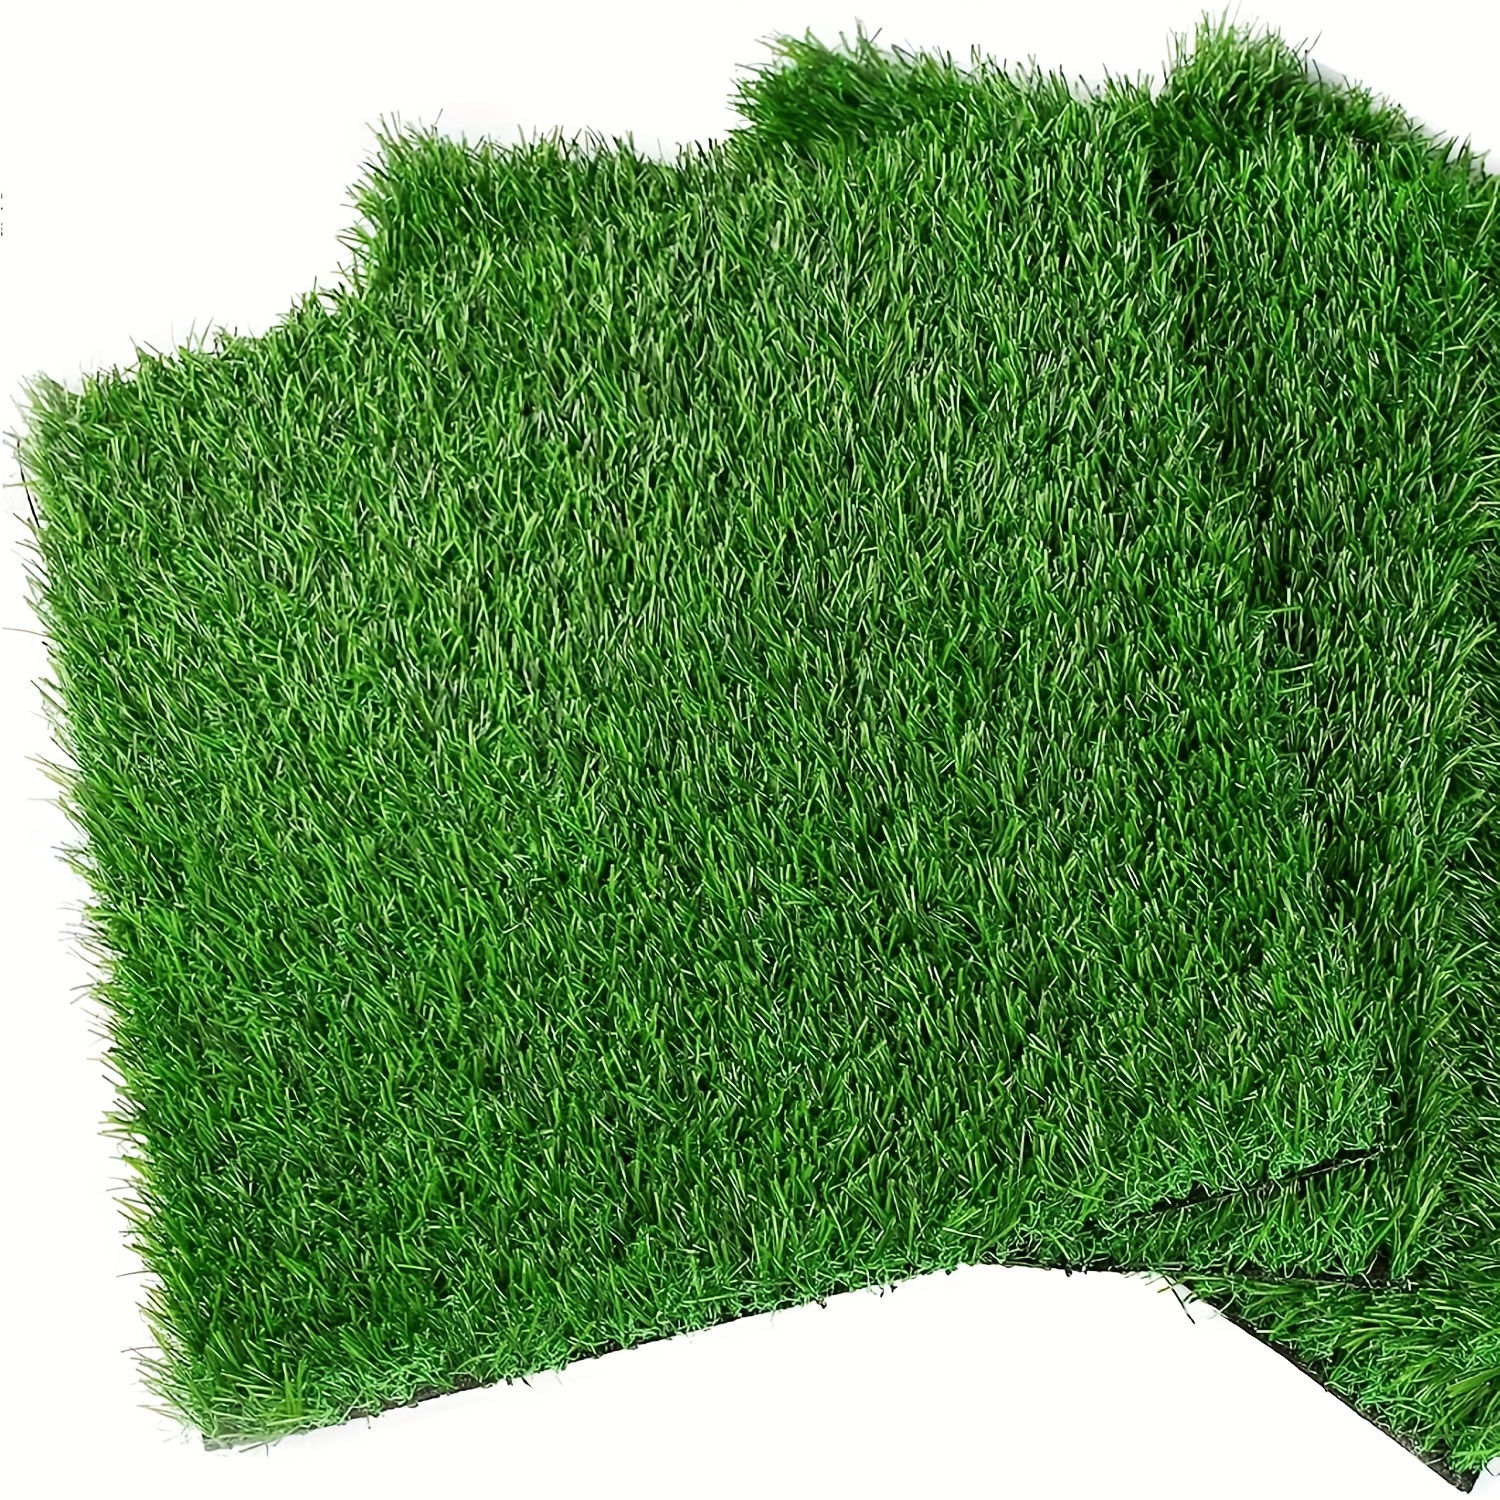 Arts & Crafts With FREE Artificial Grass, Latest Free Stuff